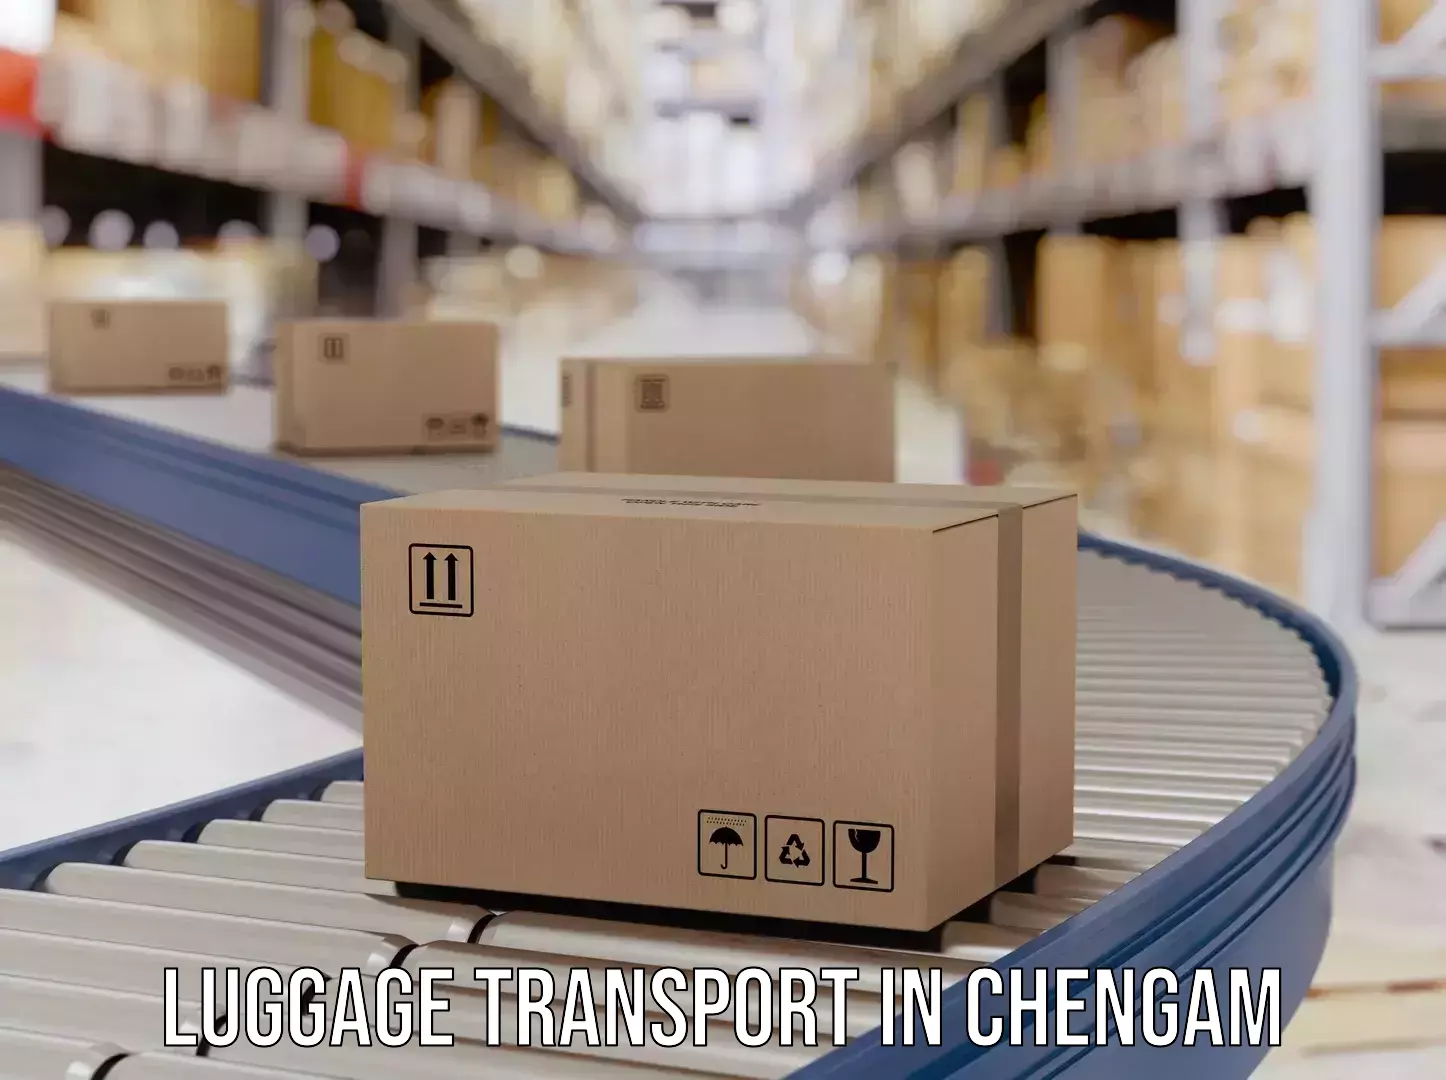 Luggage transport solutions in Chengam